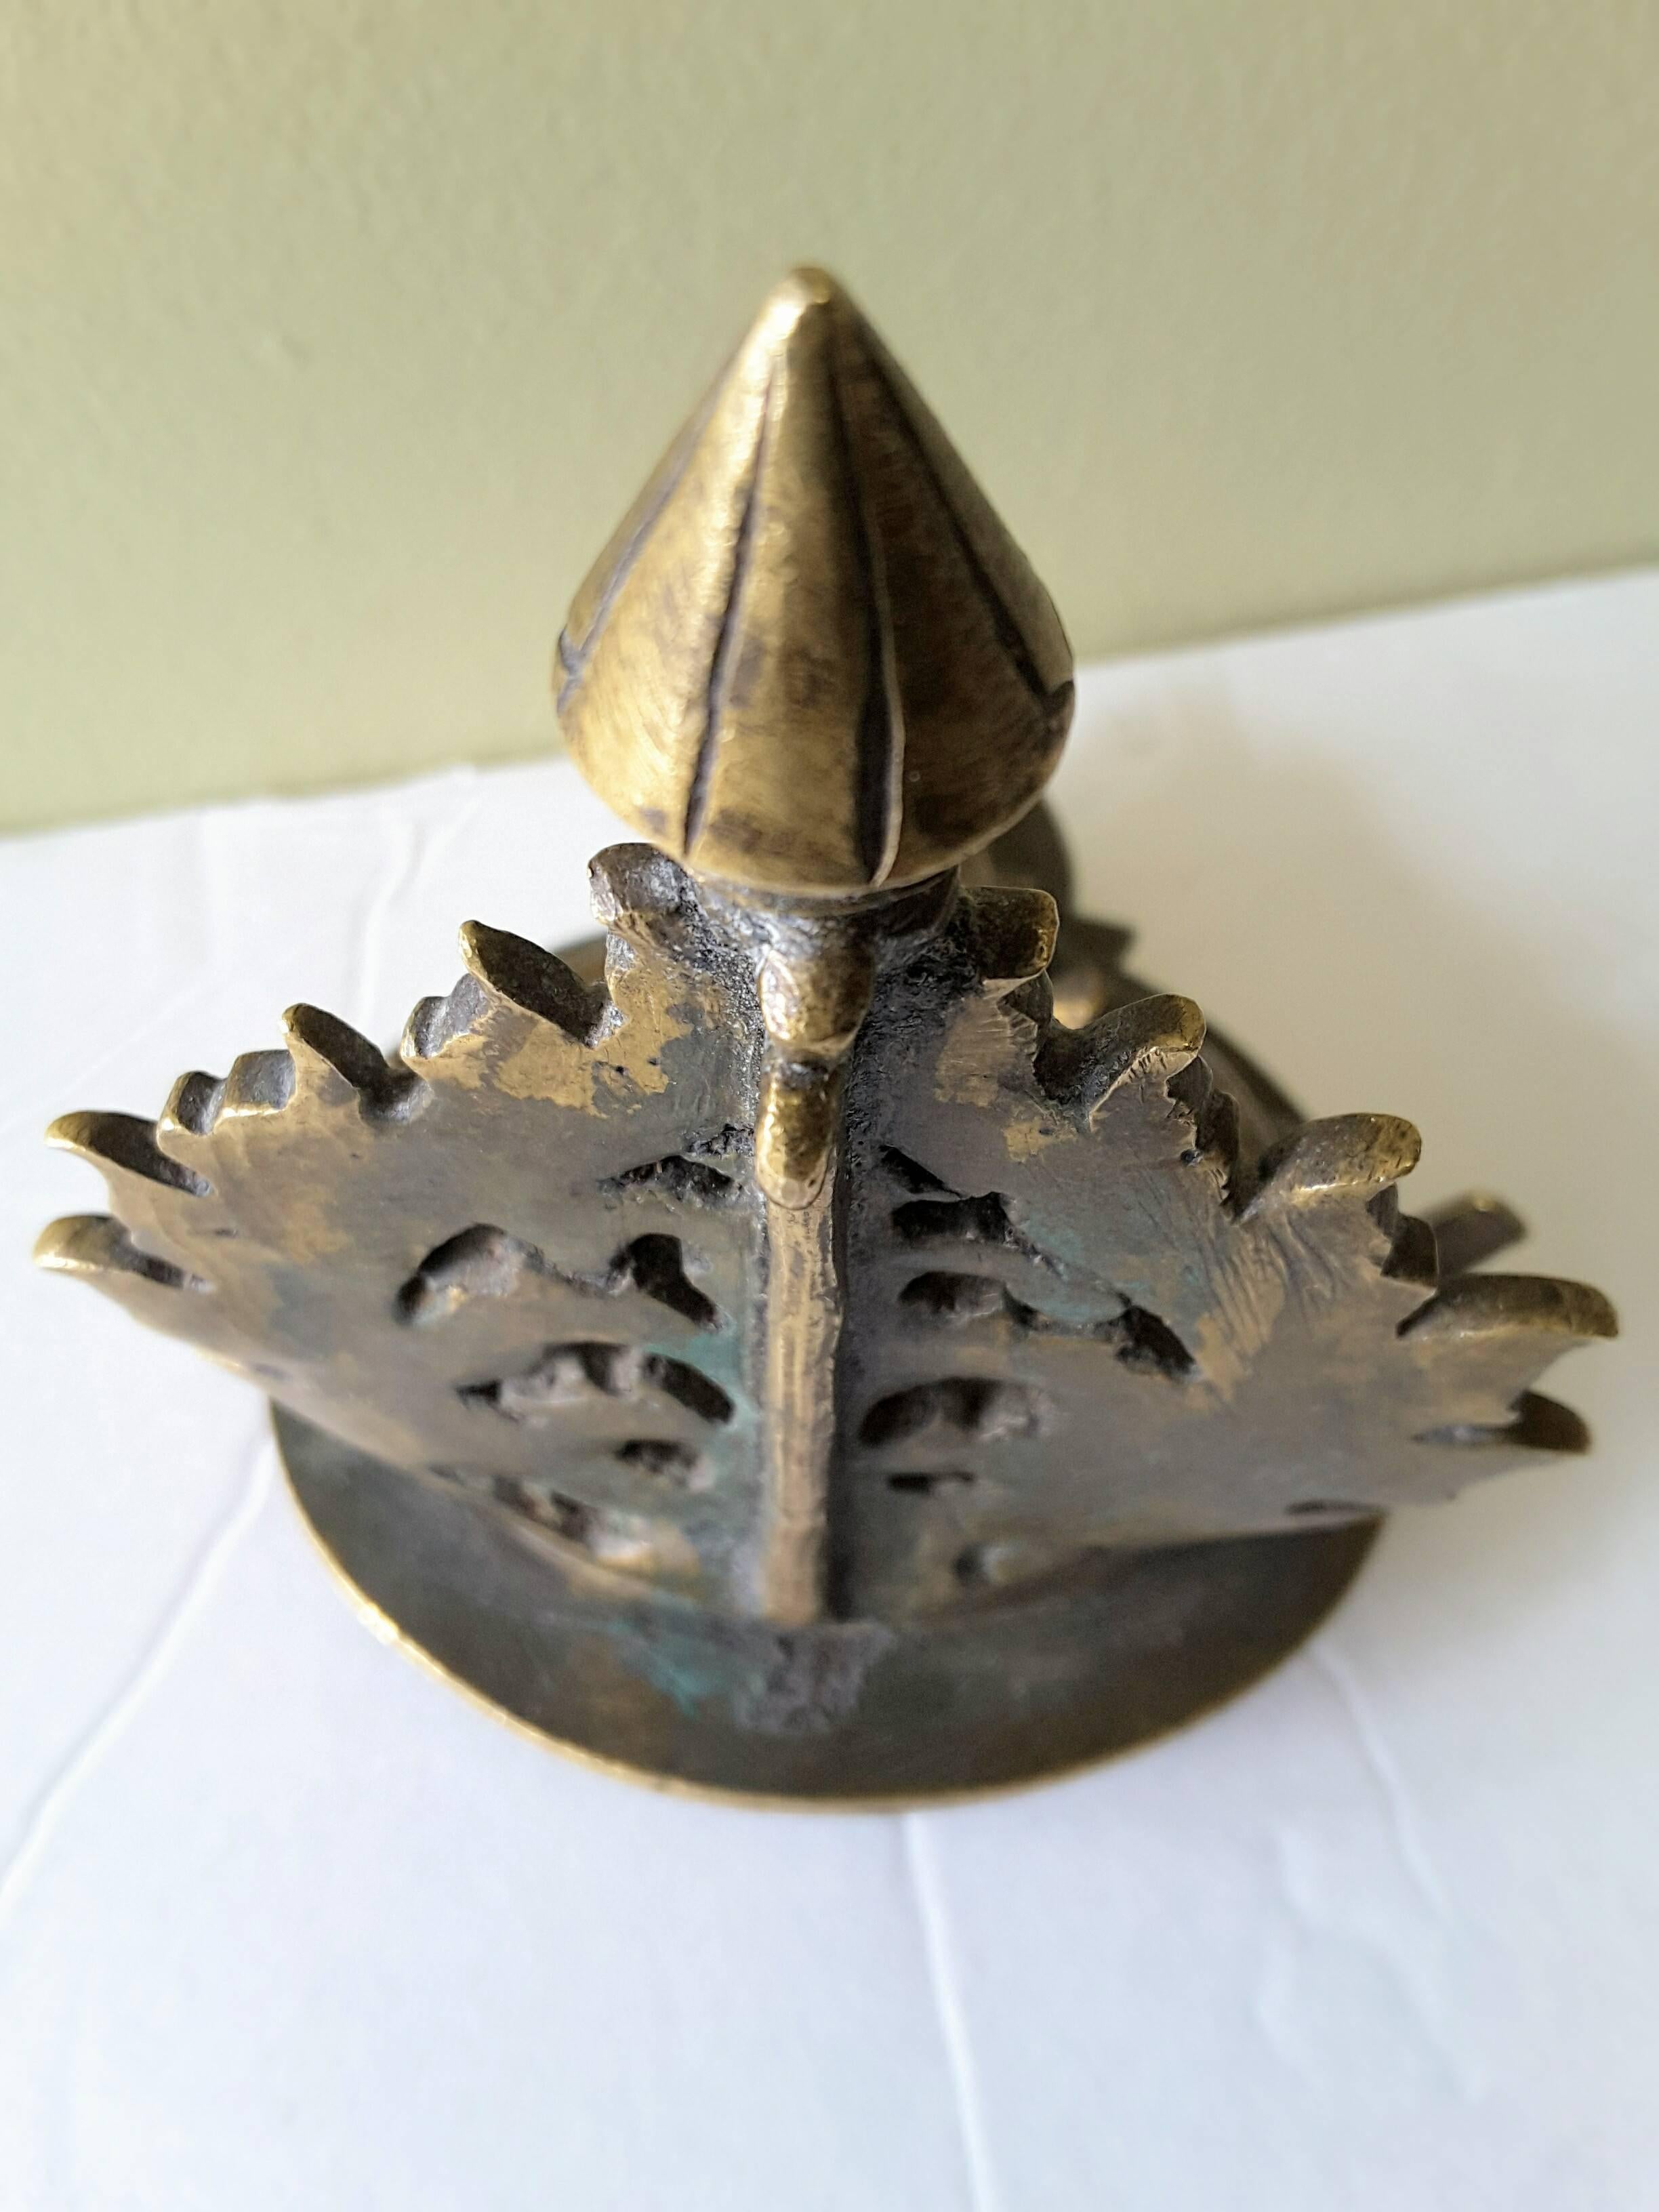 Bronze South Hindu Ritual Oil Lamp with leaf and foliage detail on the upright back with a nicely aged patina, untouched condition and has not been cleaned. The oil lamp is early 19th century or earlier.
The oil lamp measures 4 1/2" inches high